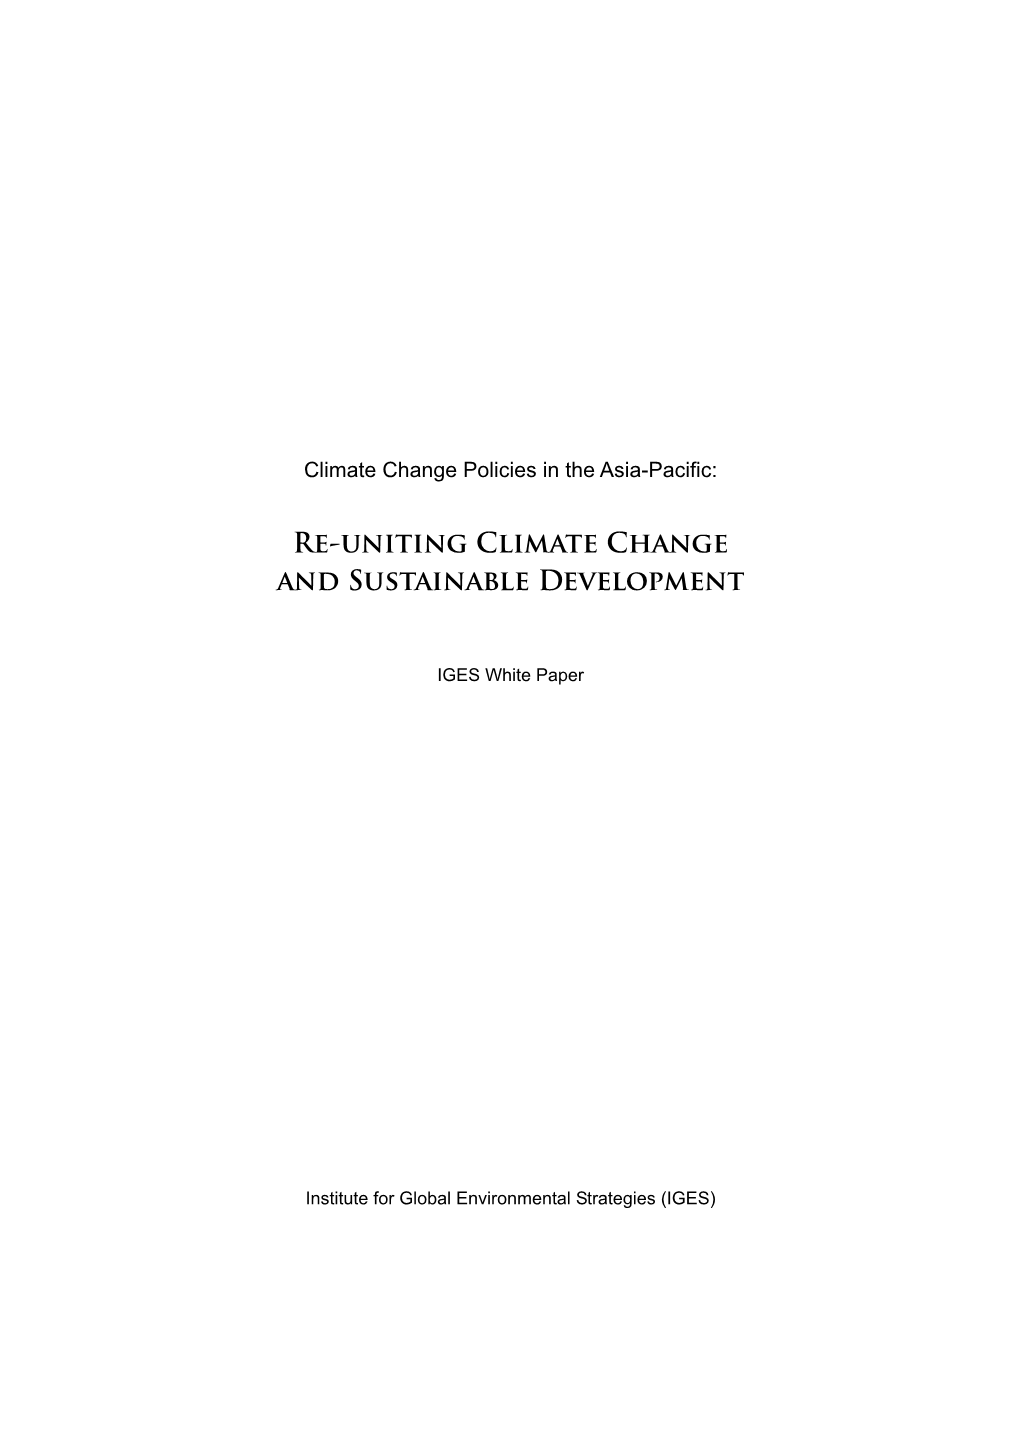 Re-Uniting Climate Change and Sustainable Development